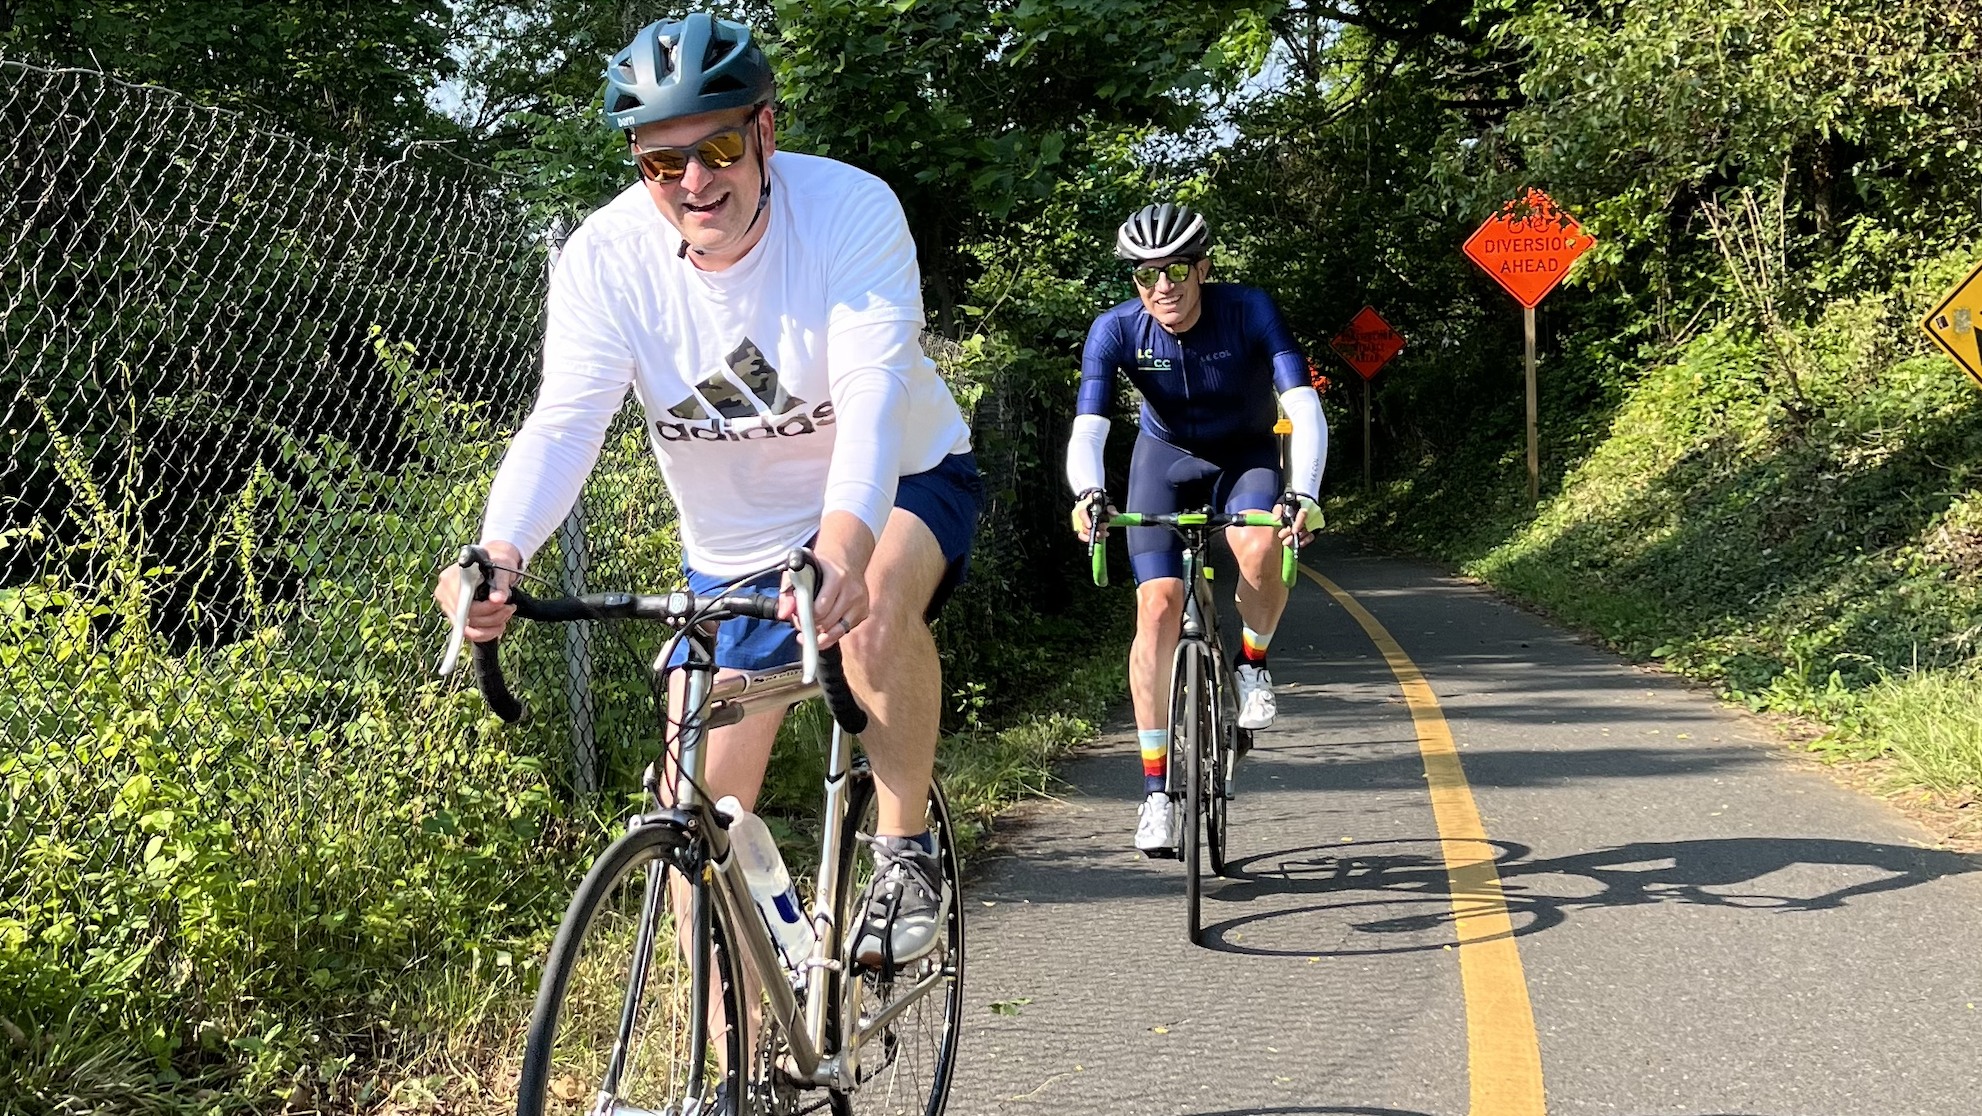 Two BellRinger riders biking on a bike path with trees